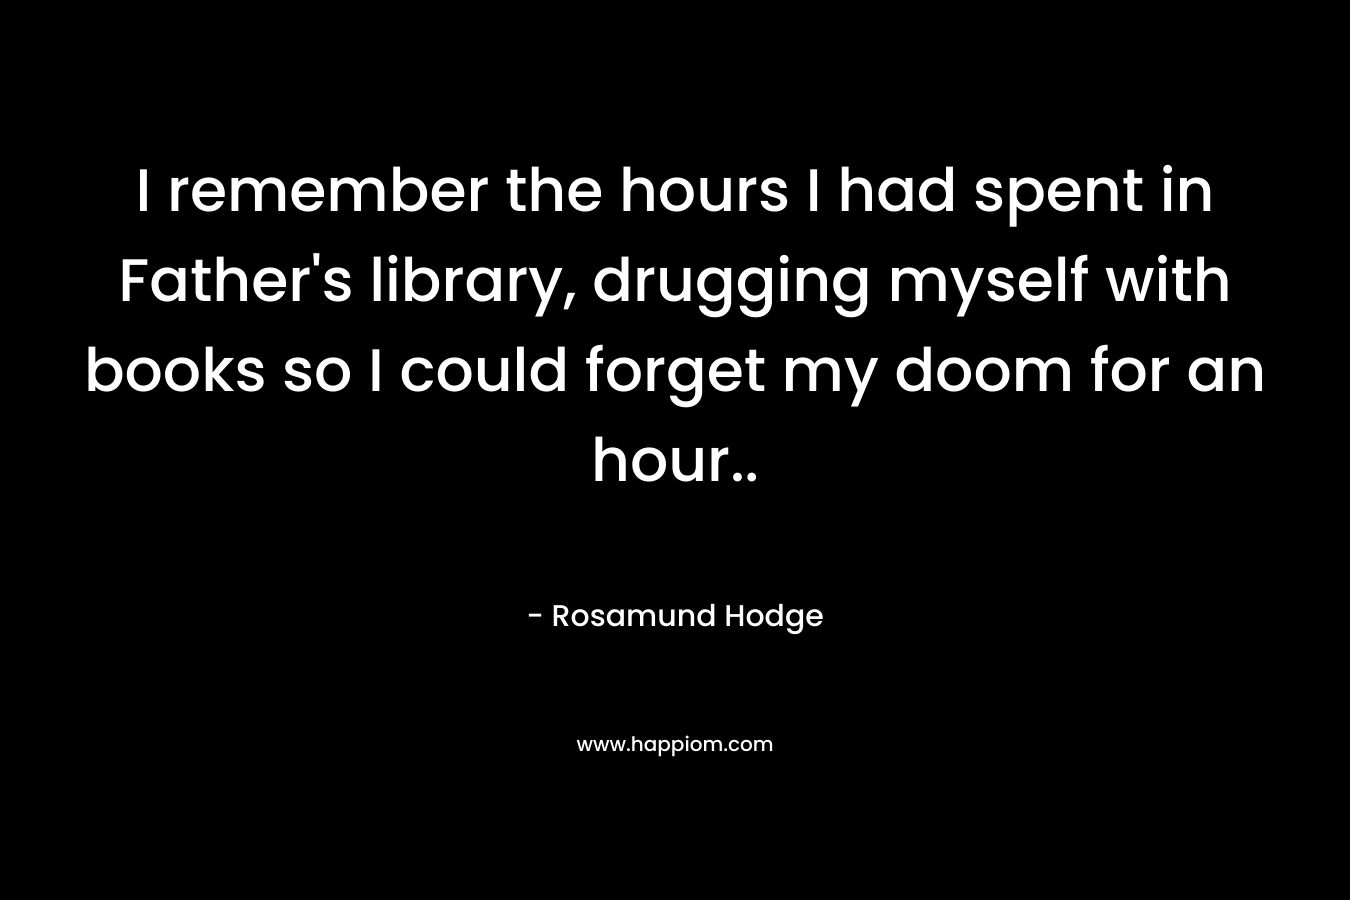 I remember the hours I had spent in Father's library, drugging myself with books so I could forget my doom for an hour..